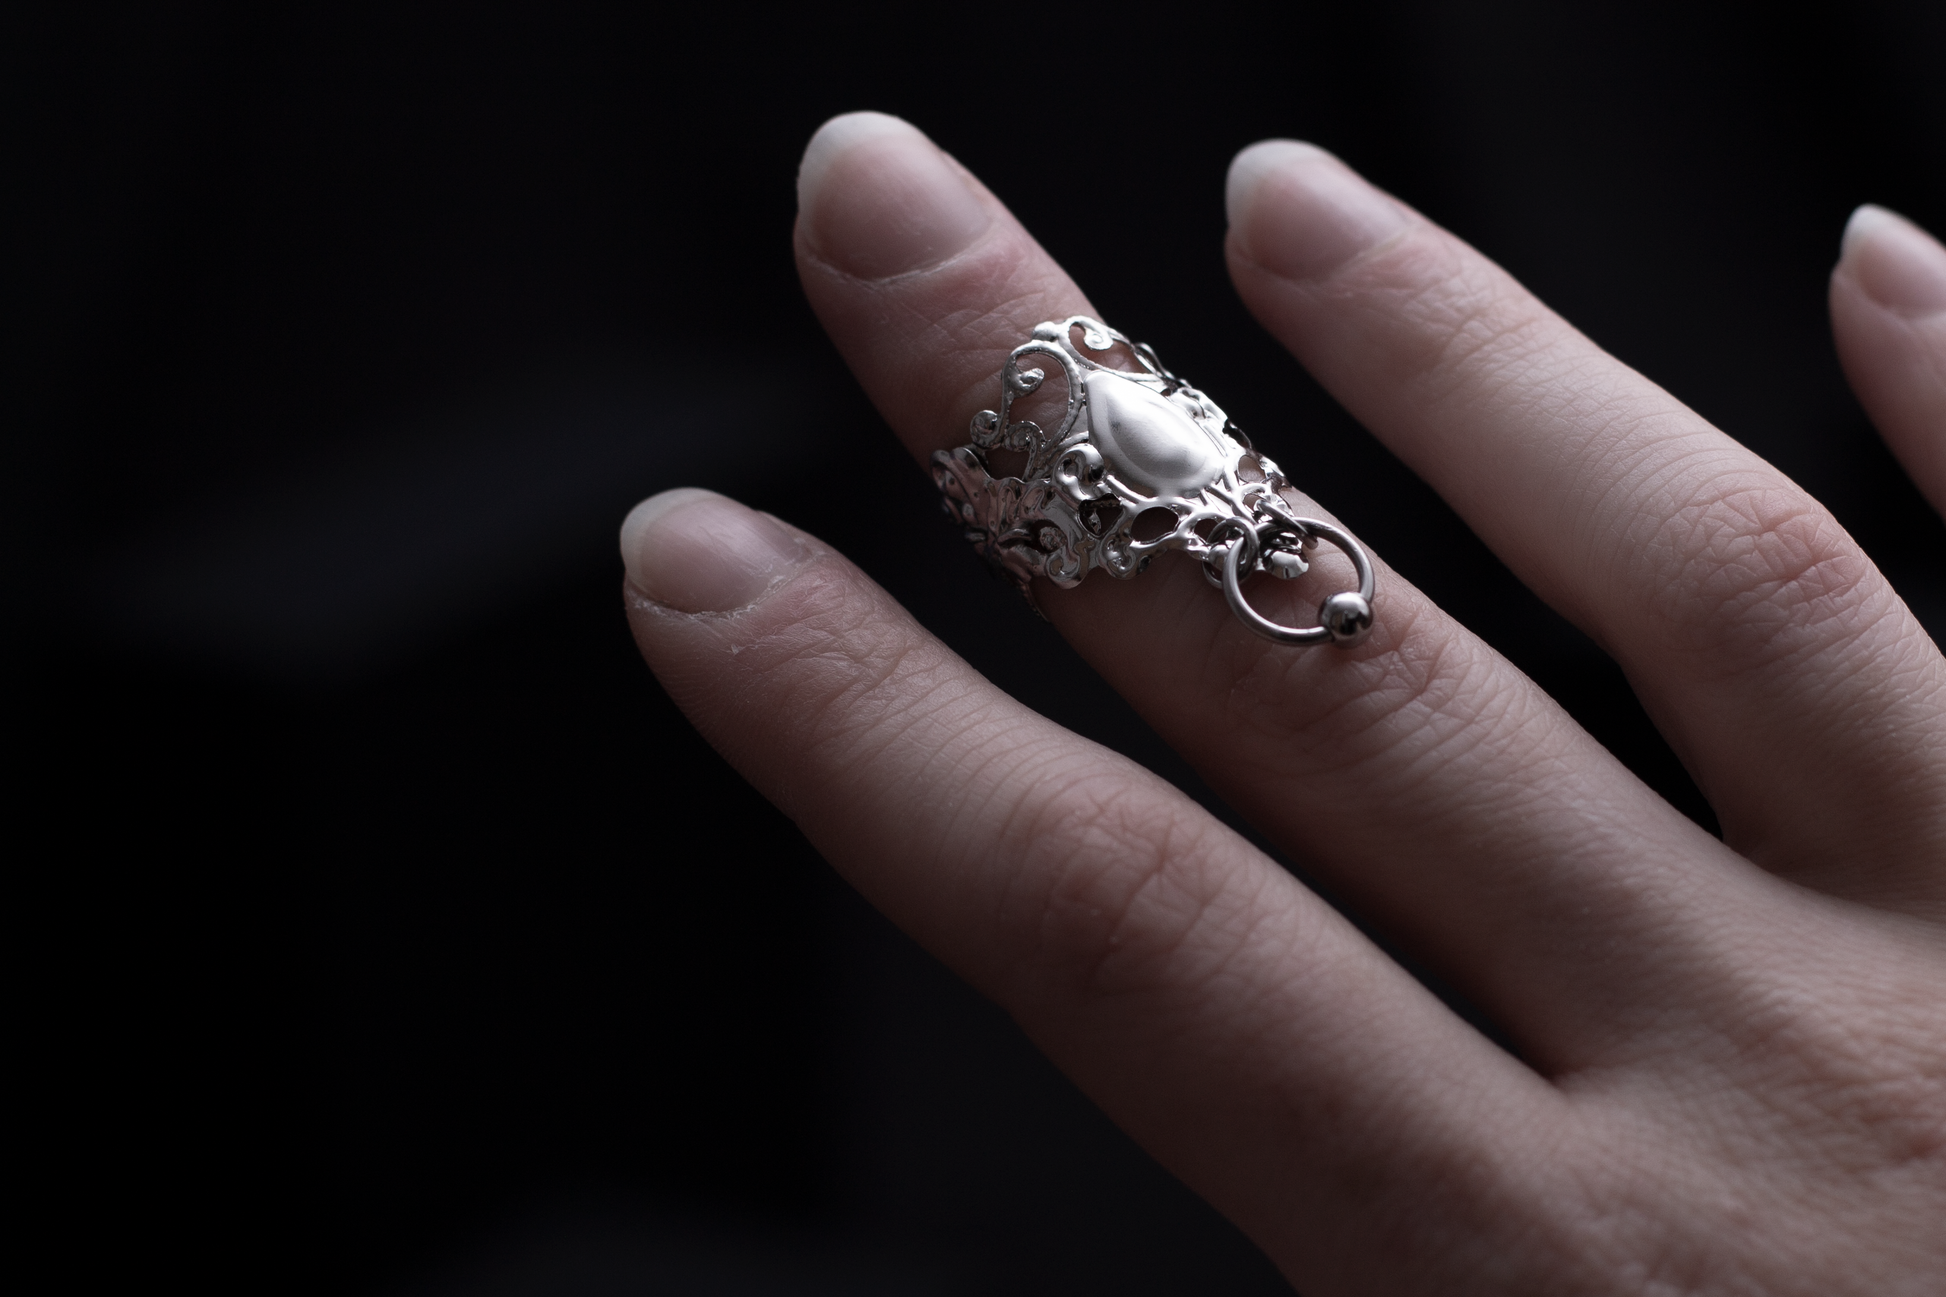 Sophisticated midi ring from Myril Jewels, featuring neo-gothic design and crafted for the dark-avantgarde enthusiast. The ring presents a whimsical witchcore style, making it an exquisite choice for Halloween, festivals, and everyday wear. A bold, gothic-chic accessory, it’s an ideal gift for the goth girlfriend or a cherished friend.